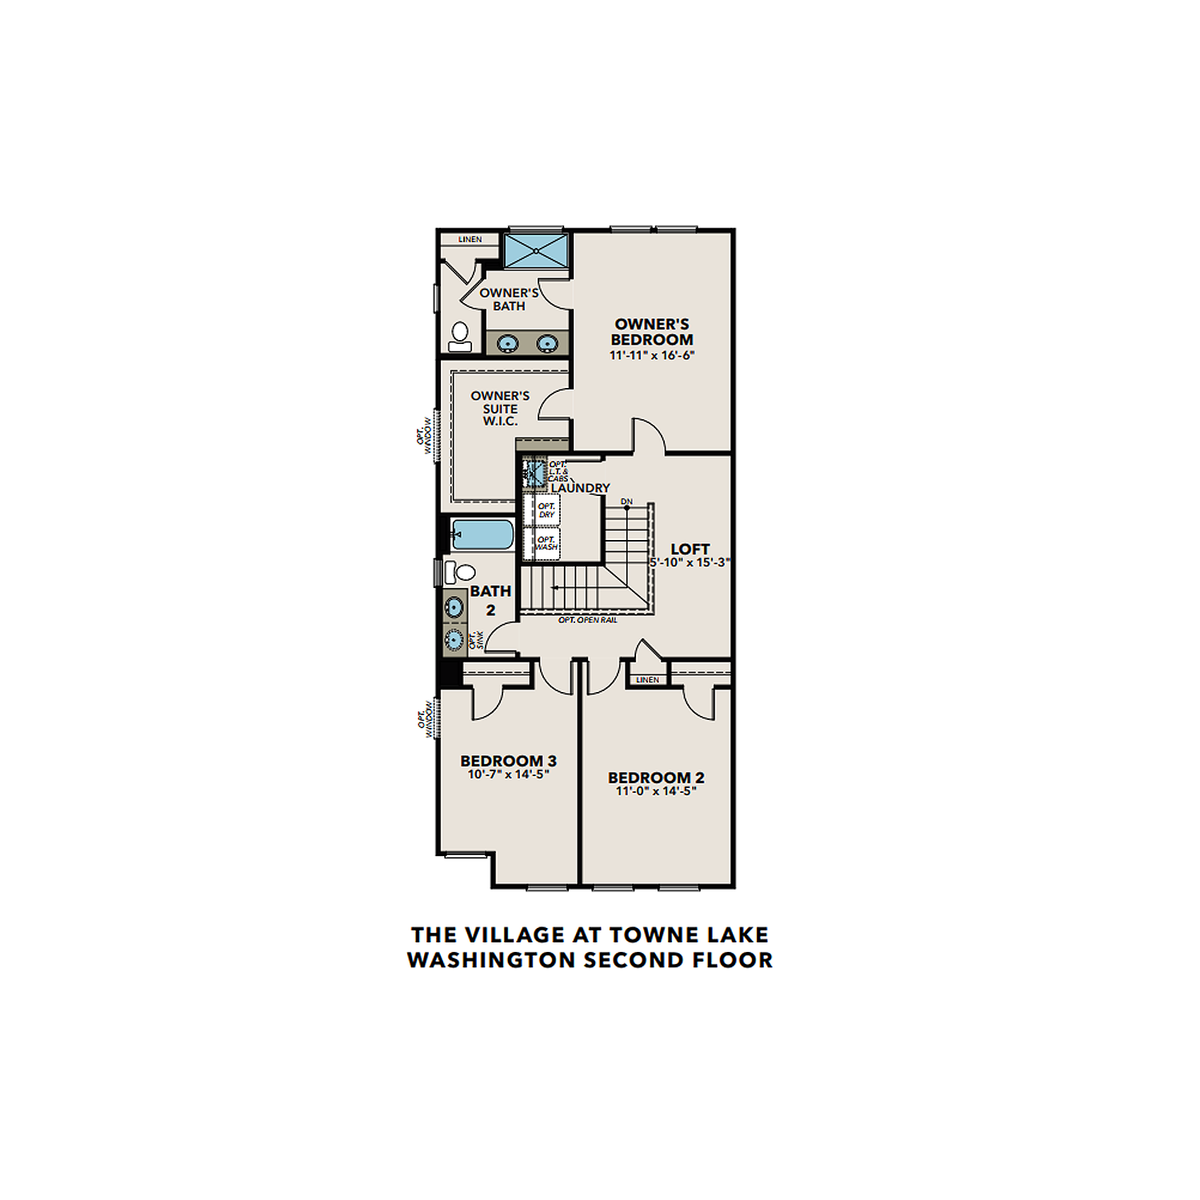 2 - The Washington F floor plan layout for 801 Stickley Oak Way in Davidson Homes' The Village at Towne Lake community.